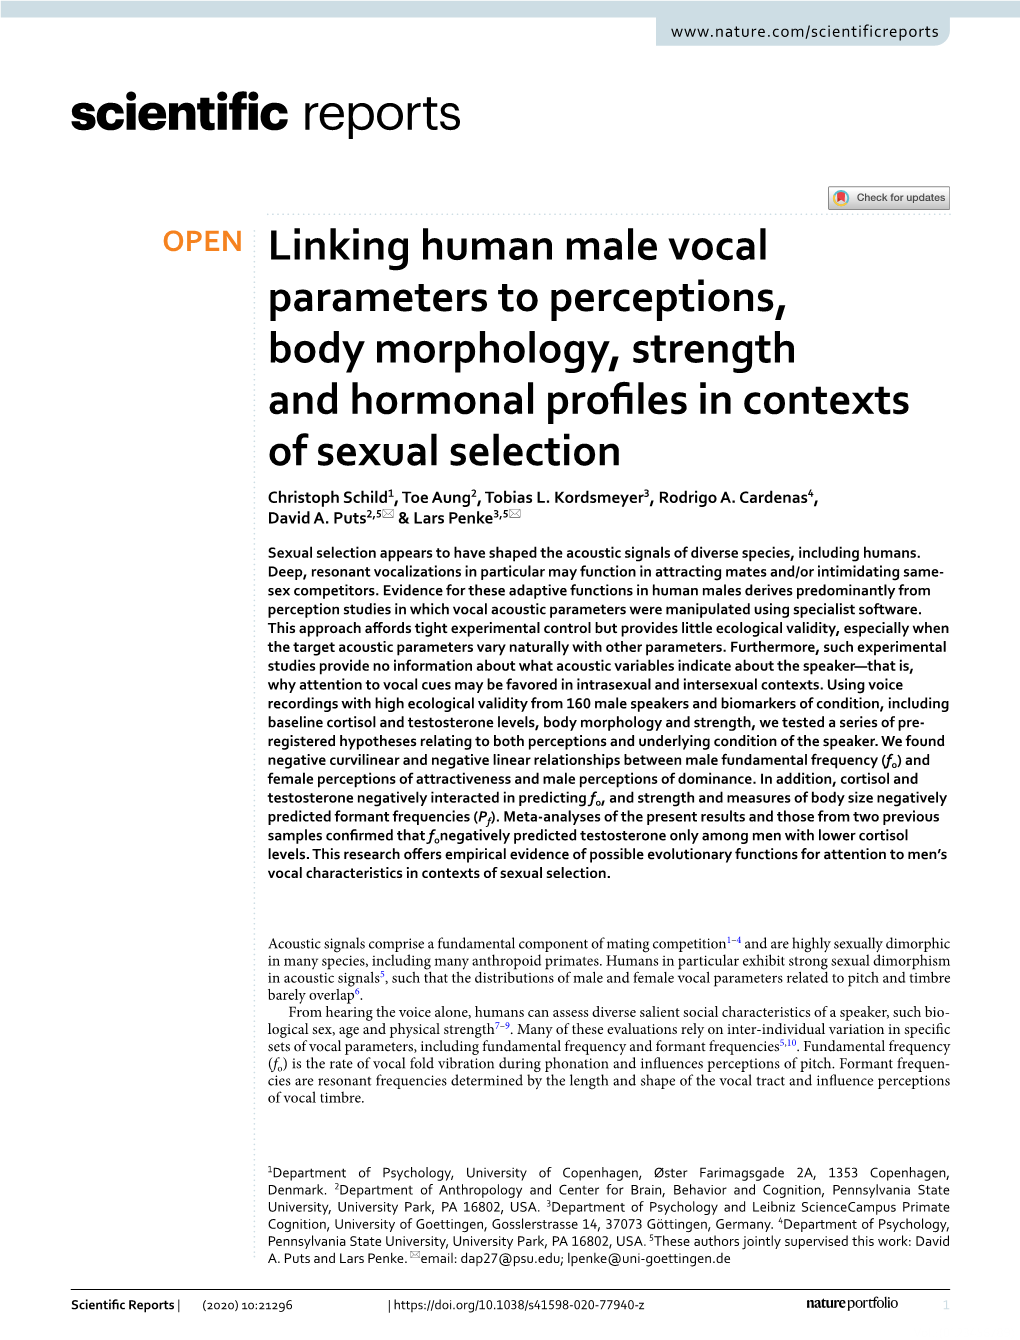 Linking Human Male Vocal Parameters to Perceptions, Body Morphology